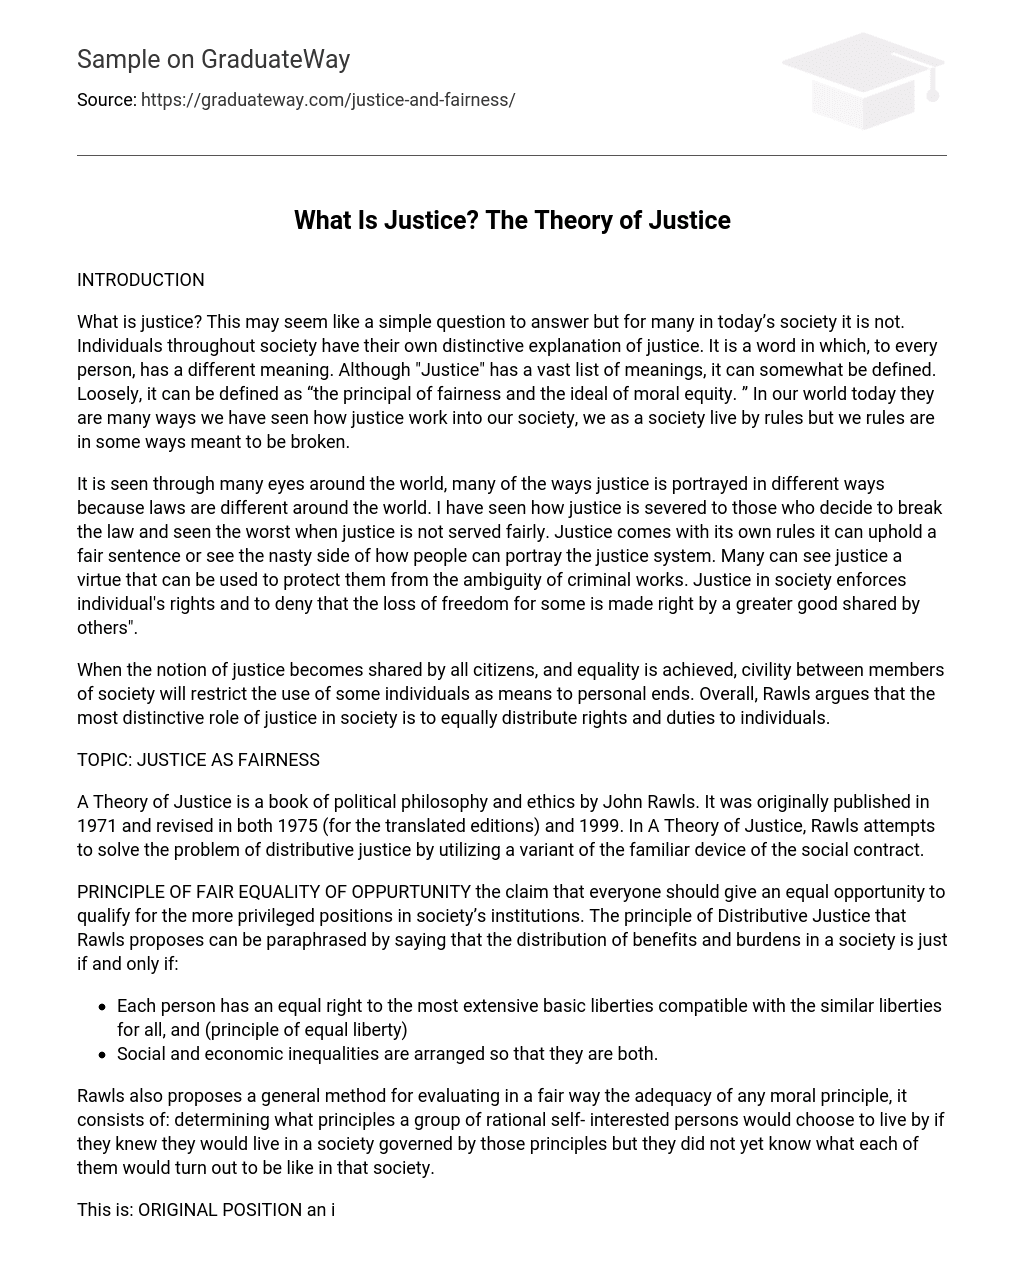 What Is Justice? The Theory of Justice